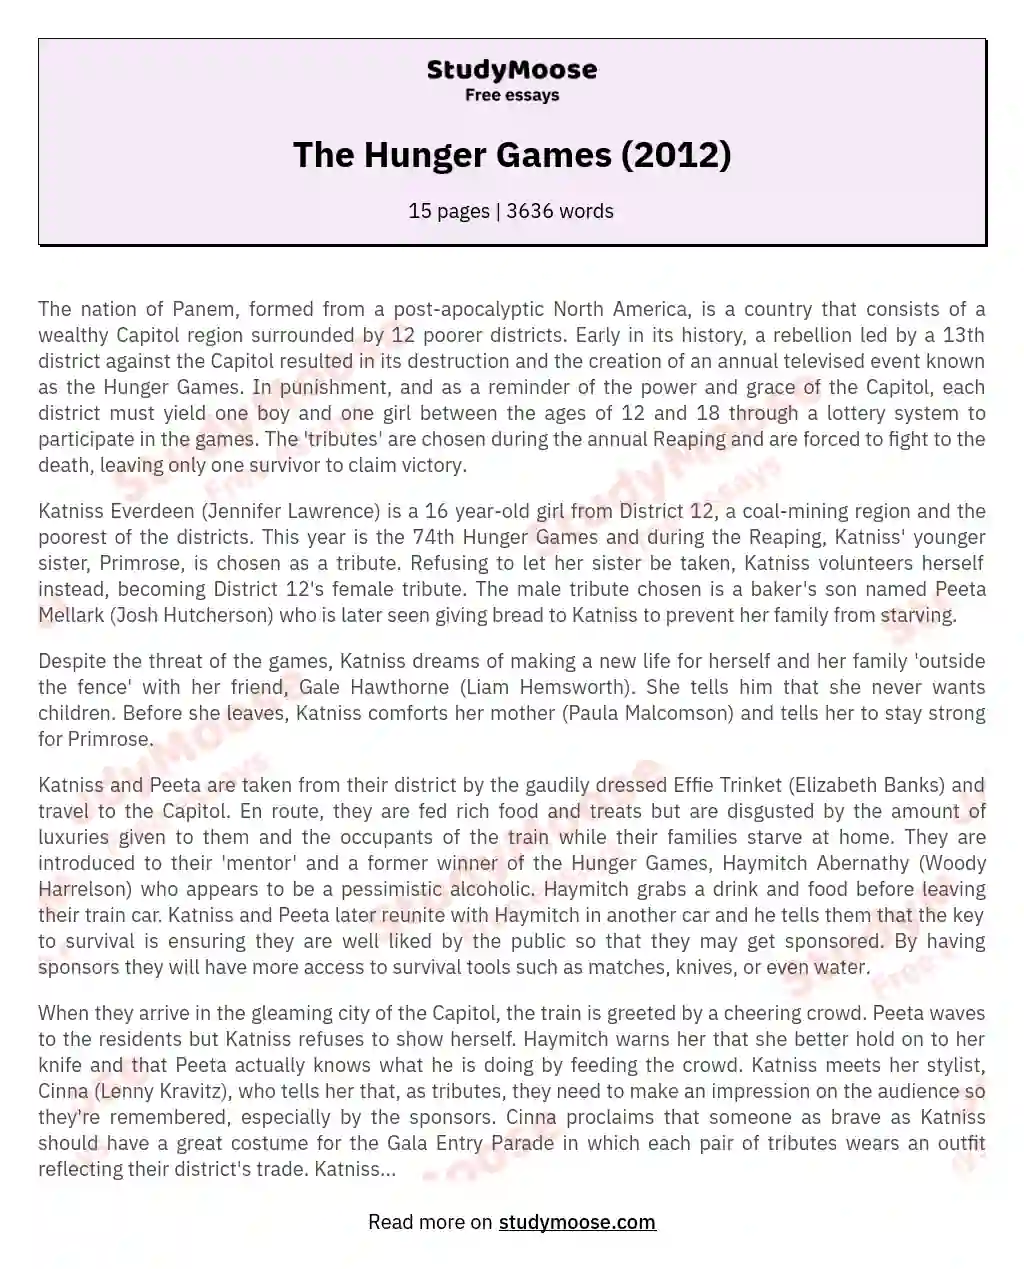 the hunger games analysis essay